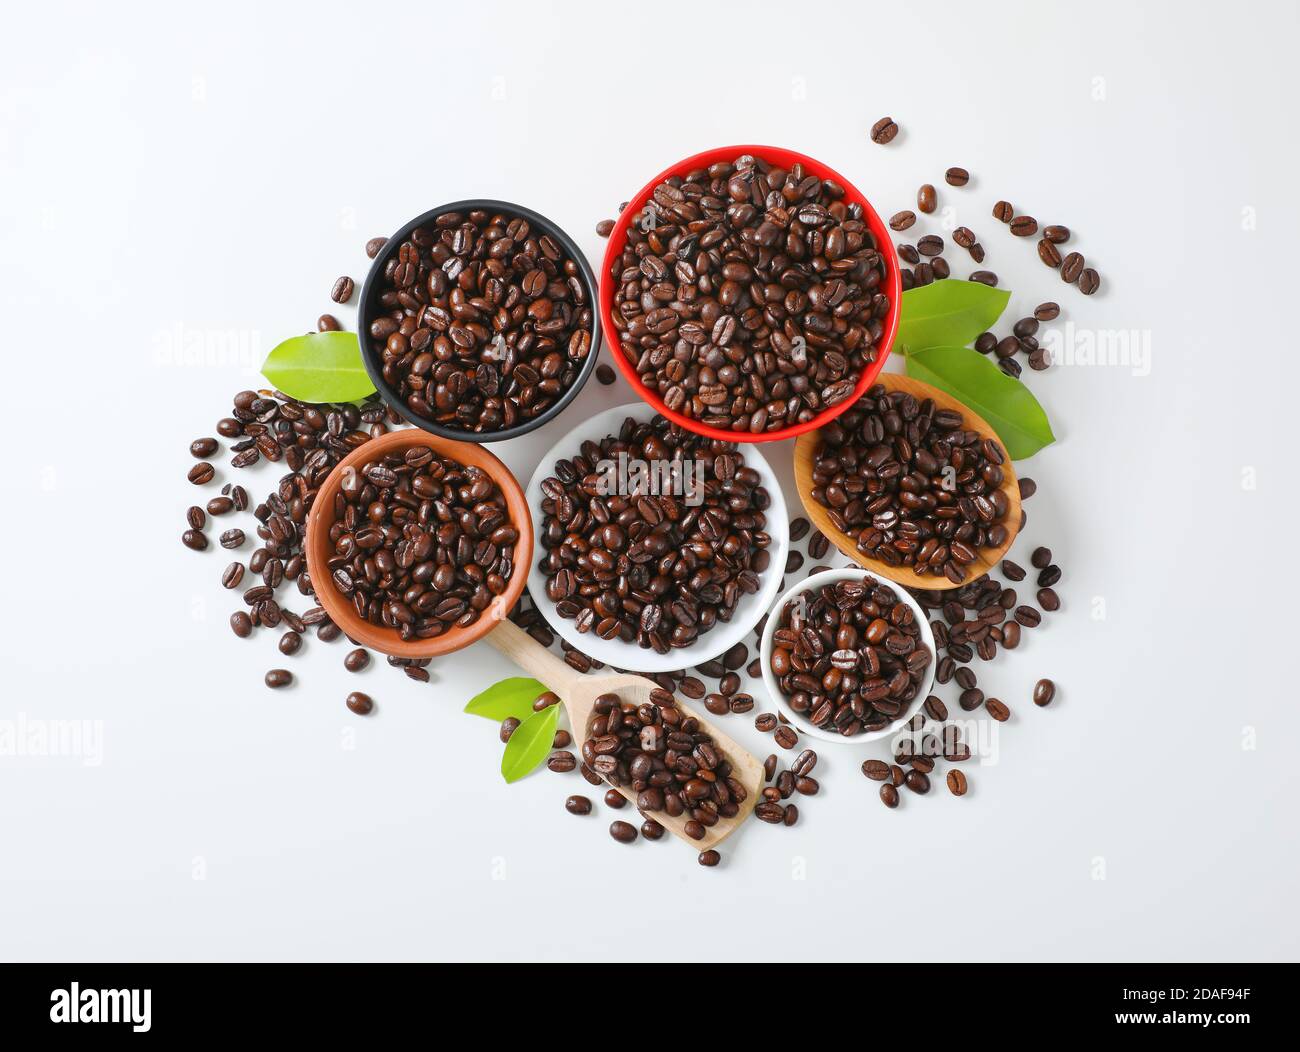 Roasted coffee beans in various bowls, on plate and wooden scoop Stock Photo